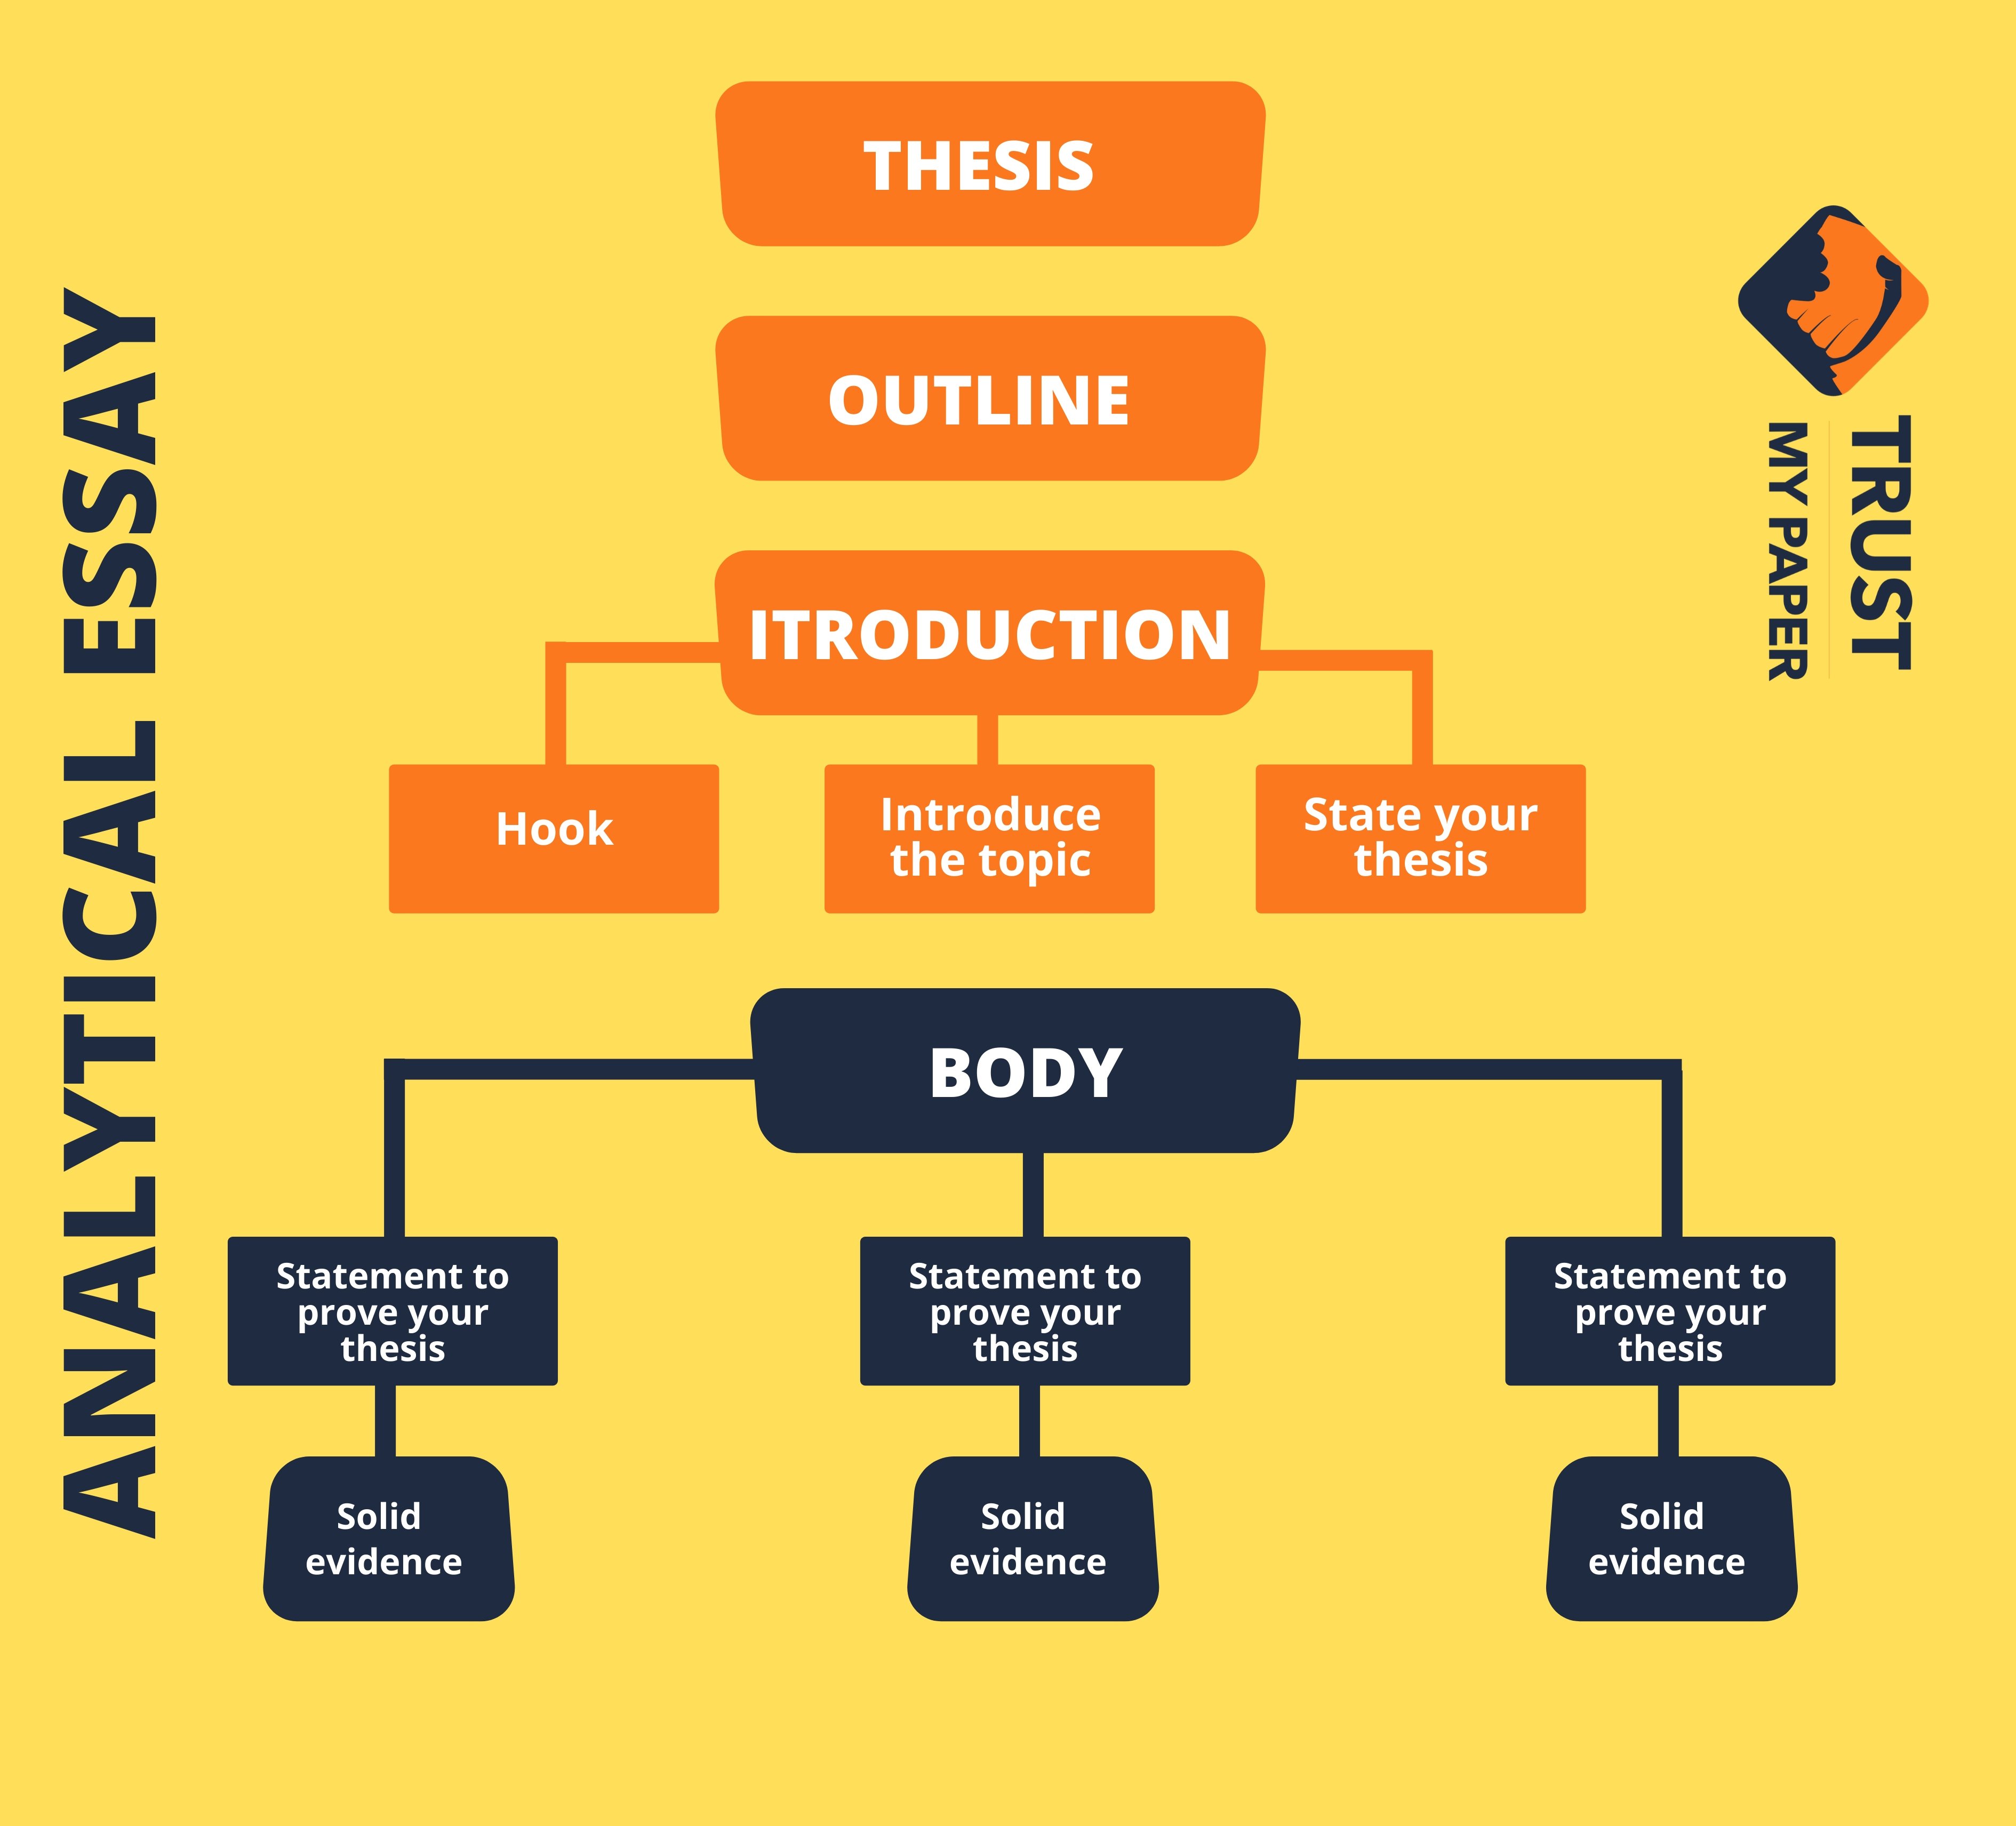 to analyze whether the structure of an essay on man includes